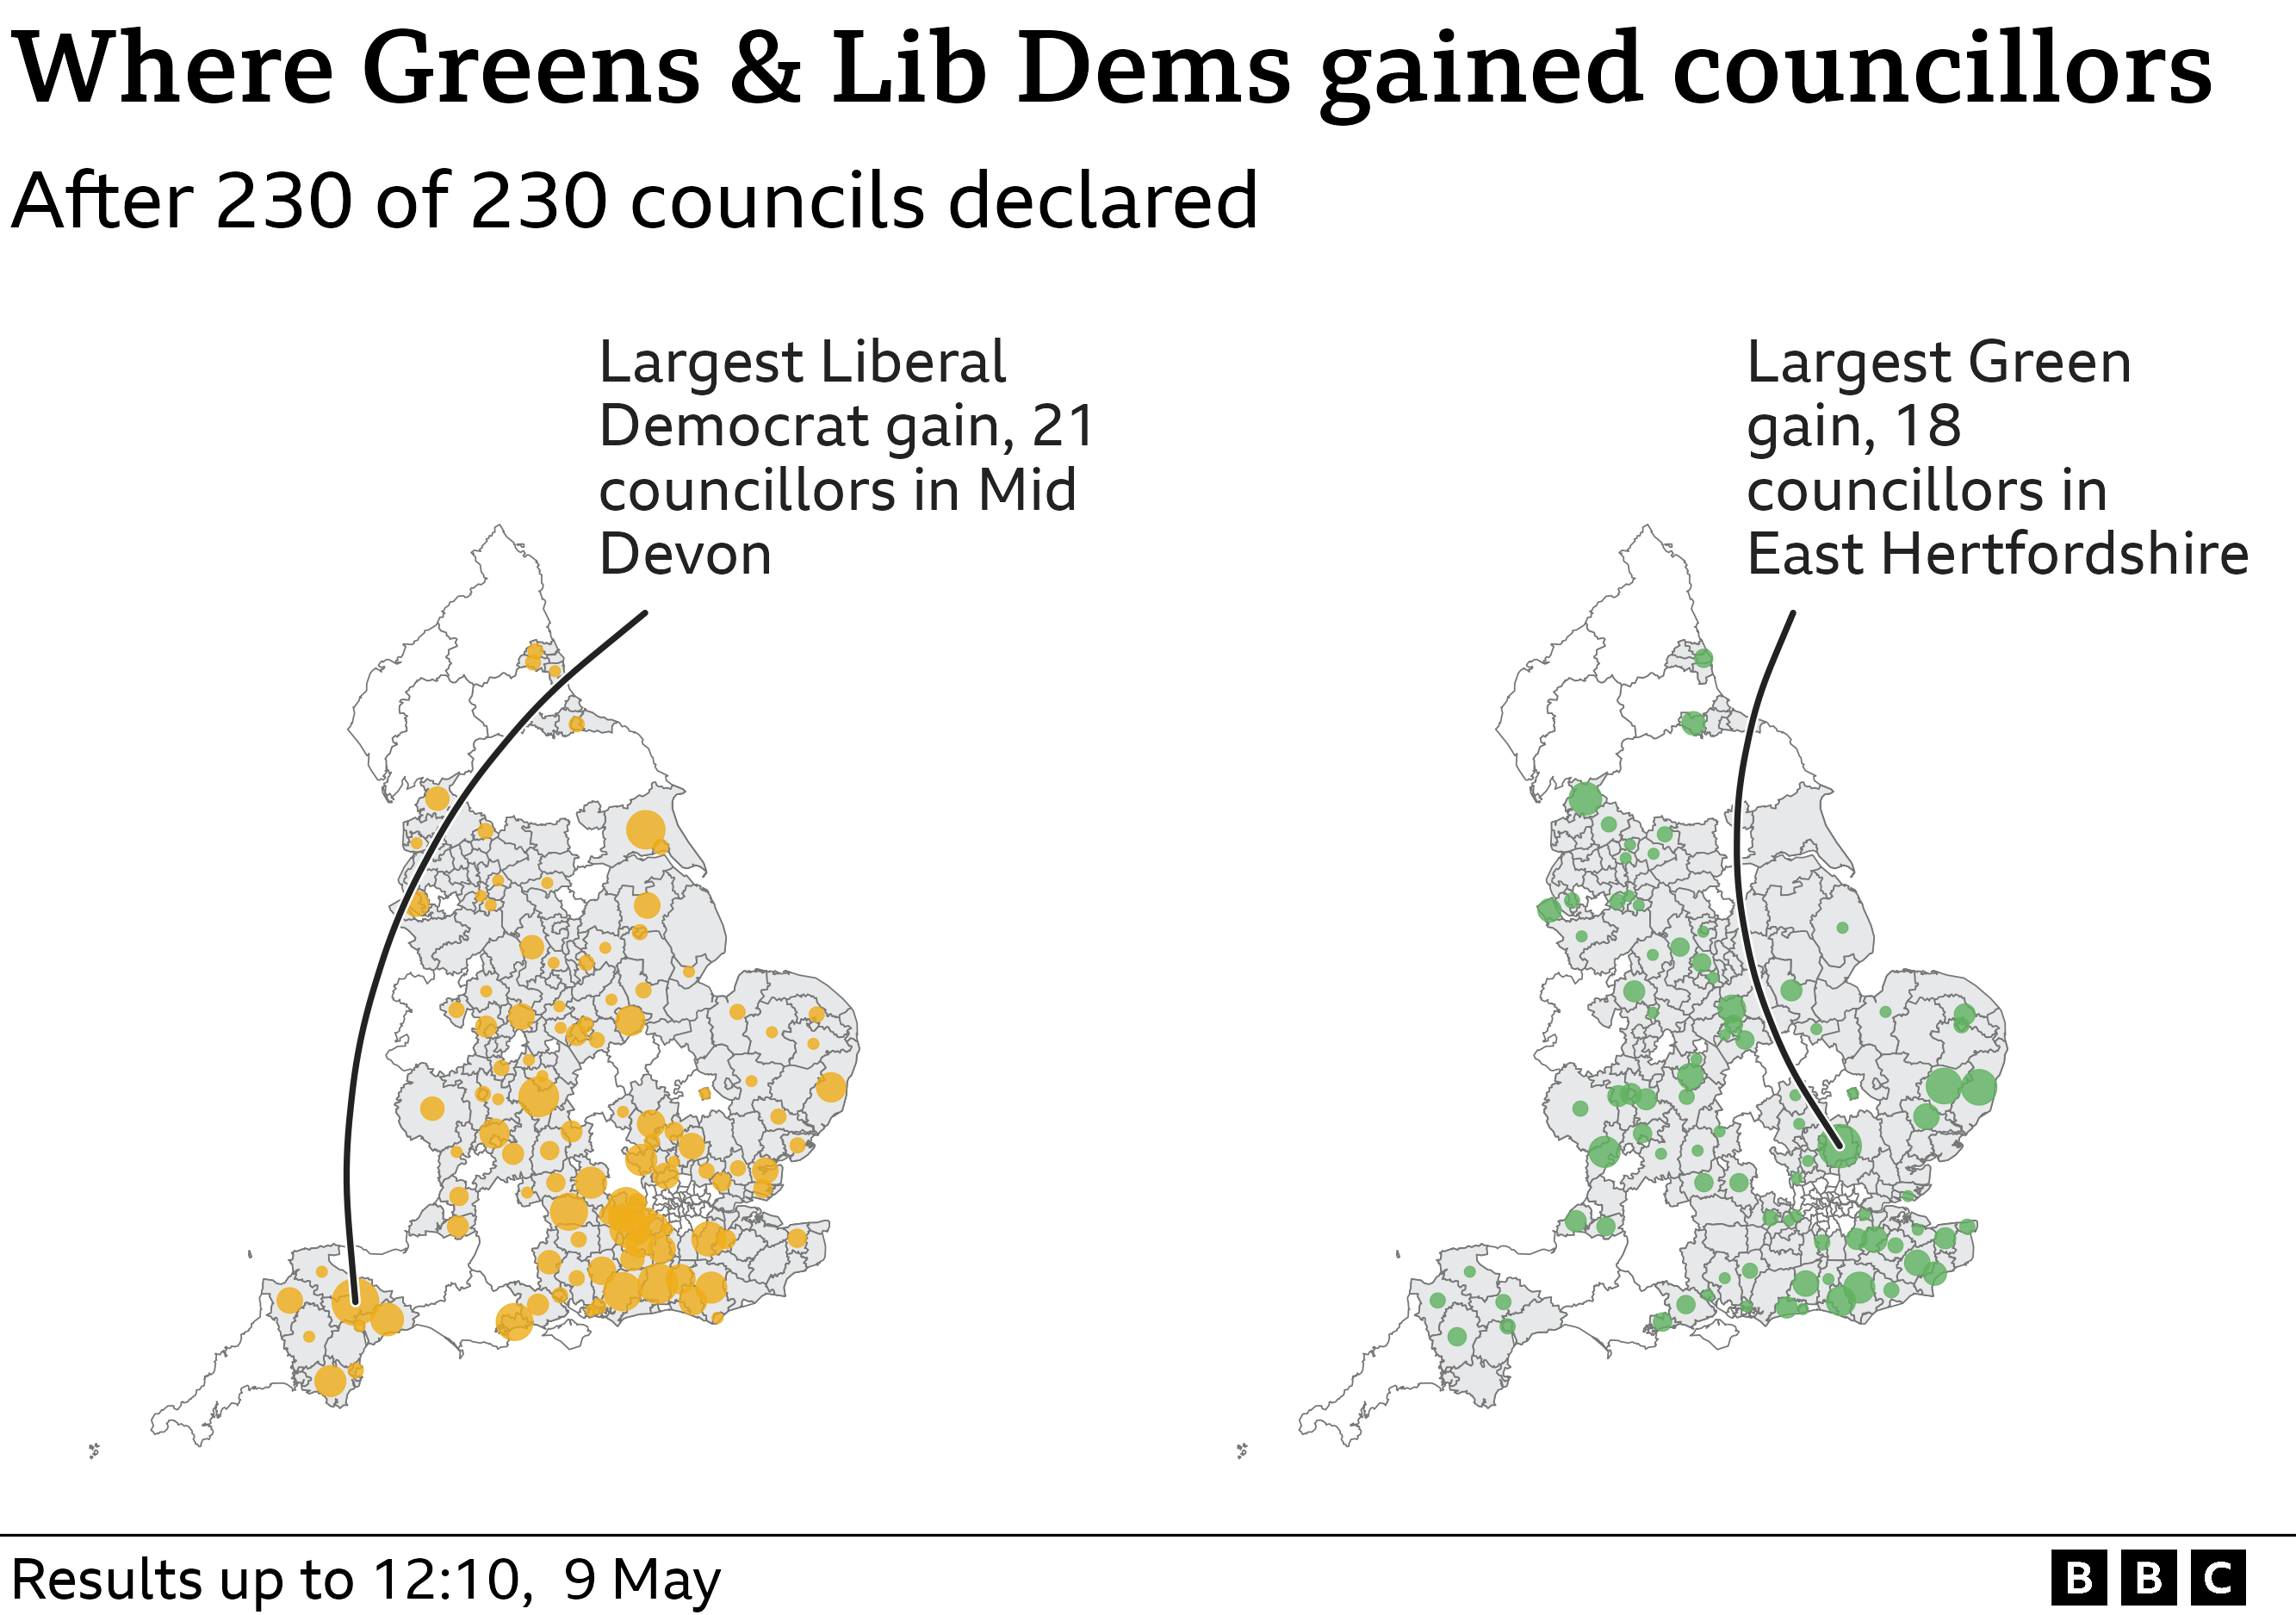 Map showing where Liberal Democrats and Greens gained councillors. Largest Liberal Democrat gain, 21 councillors in Mid Devon . Largest Green gain, 18 councillors in East Hertfordshire.